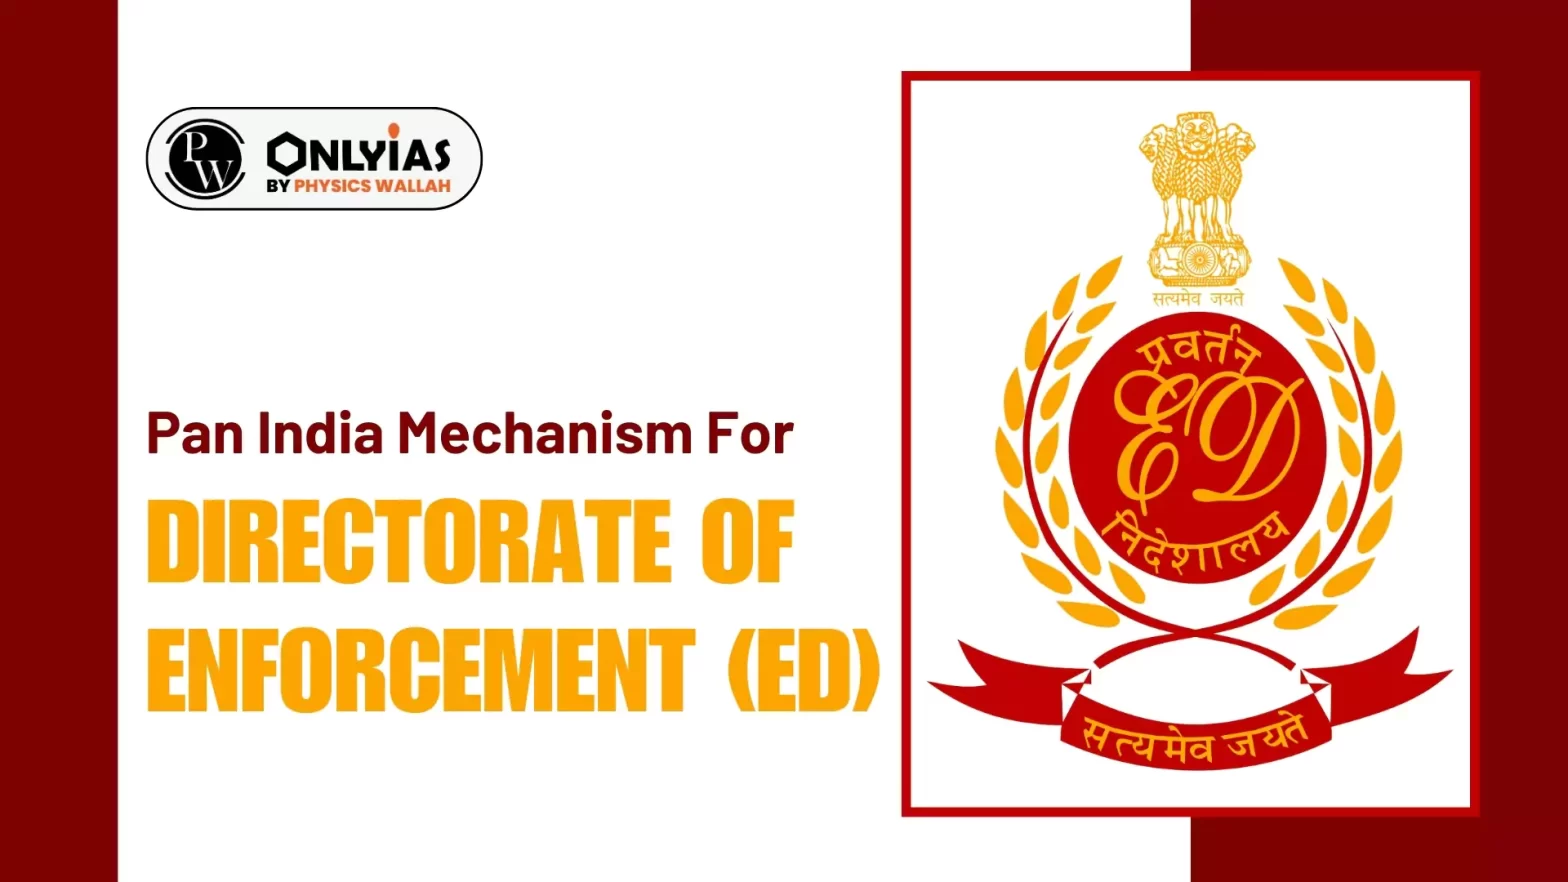 Pan India Mechanism For Directorate of Enforcement (ED)